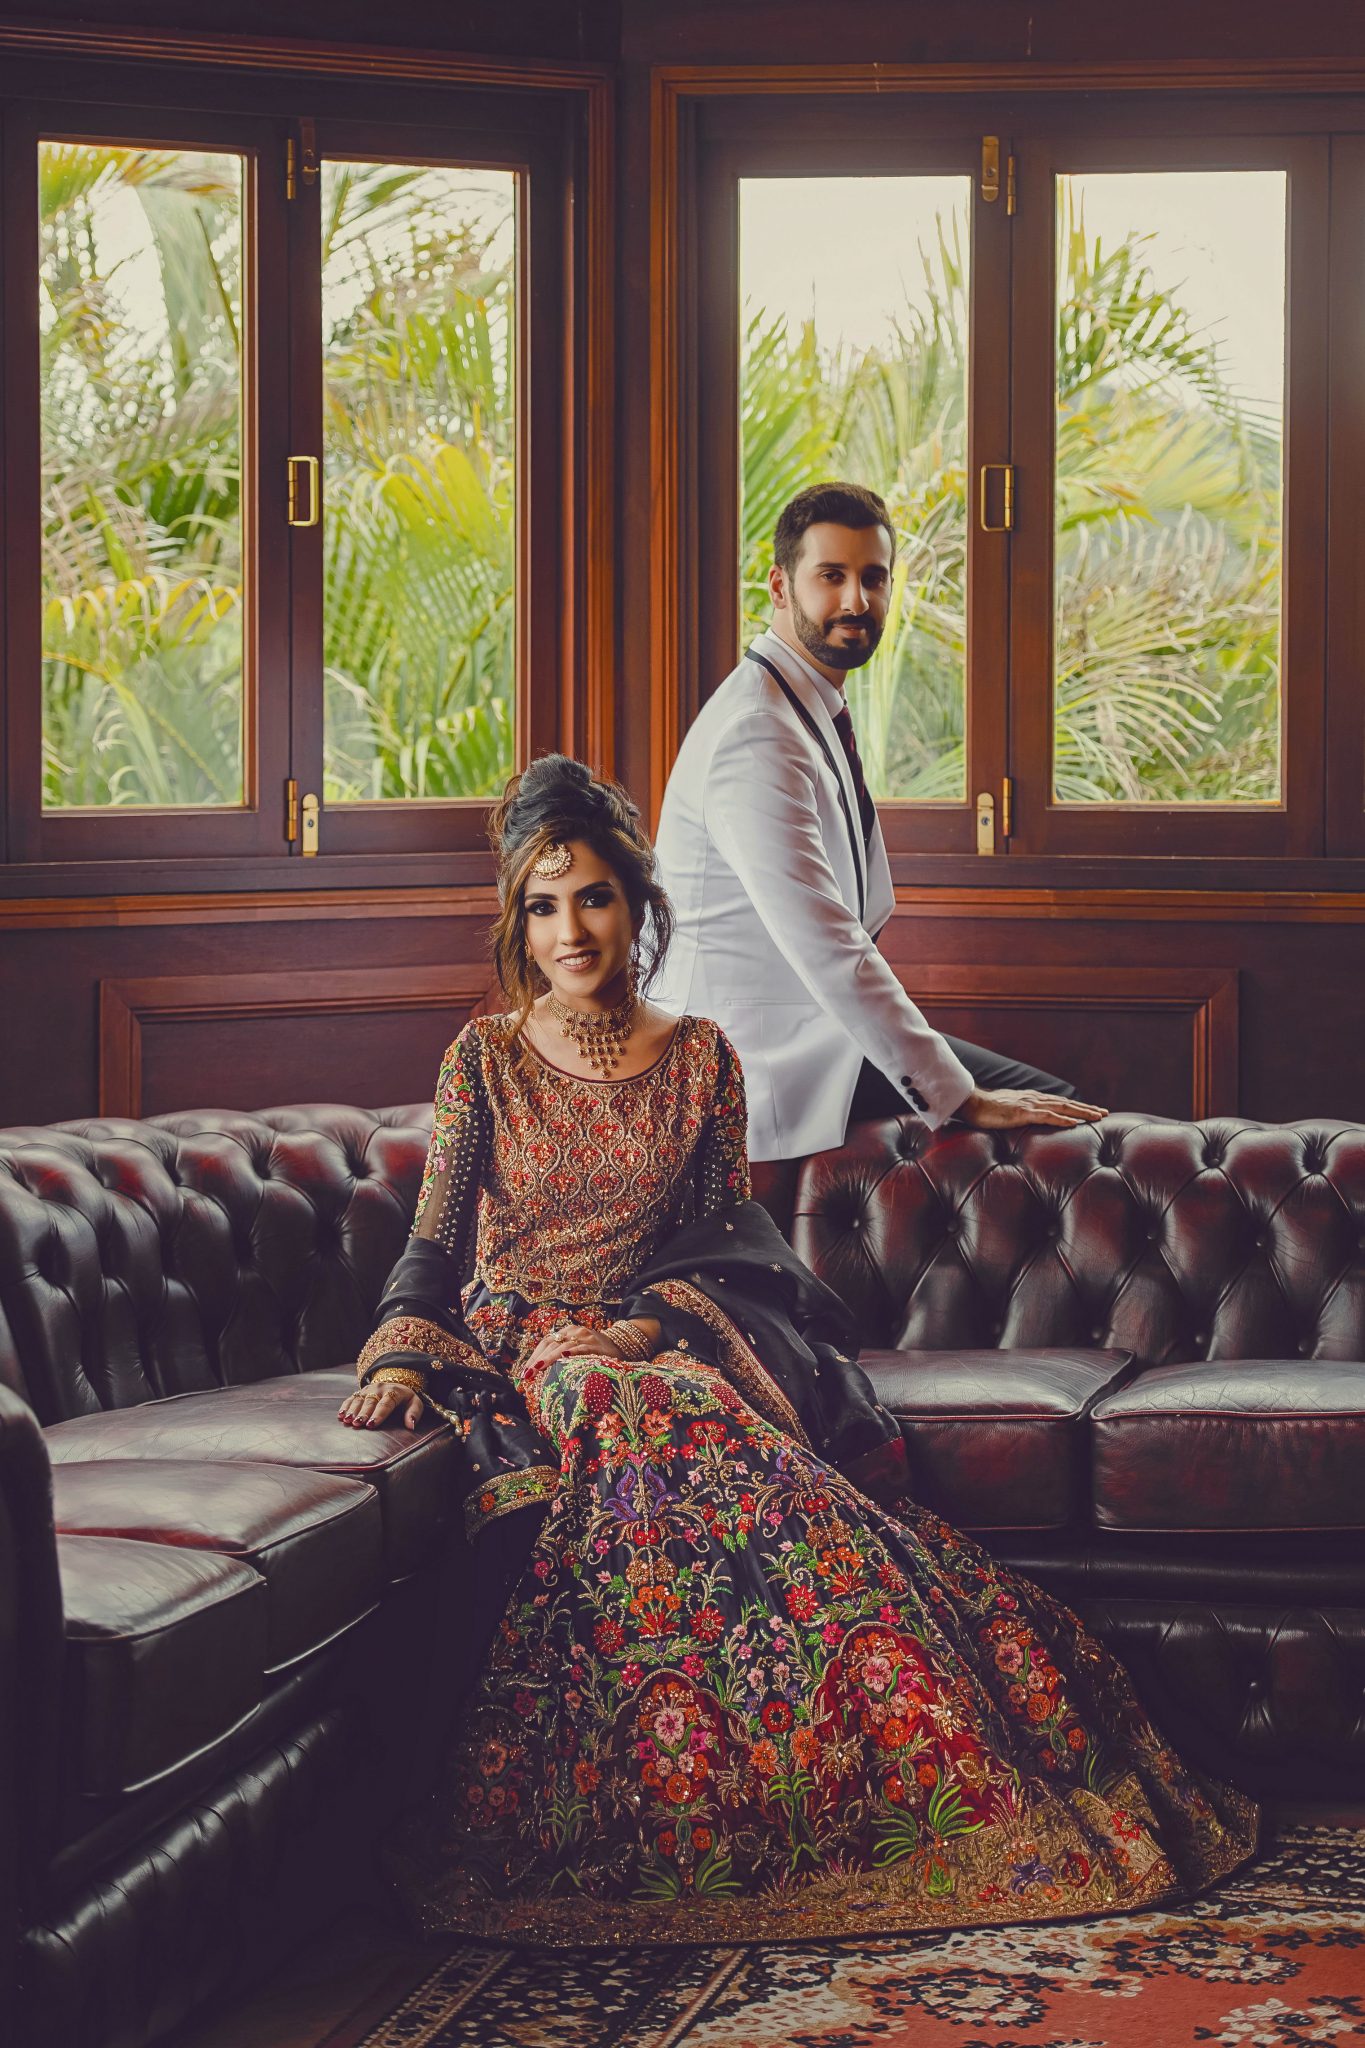 A Groom and Bride are sitting on a sofa